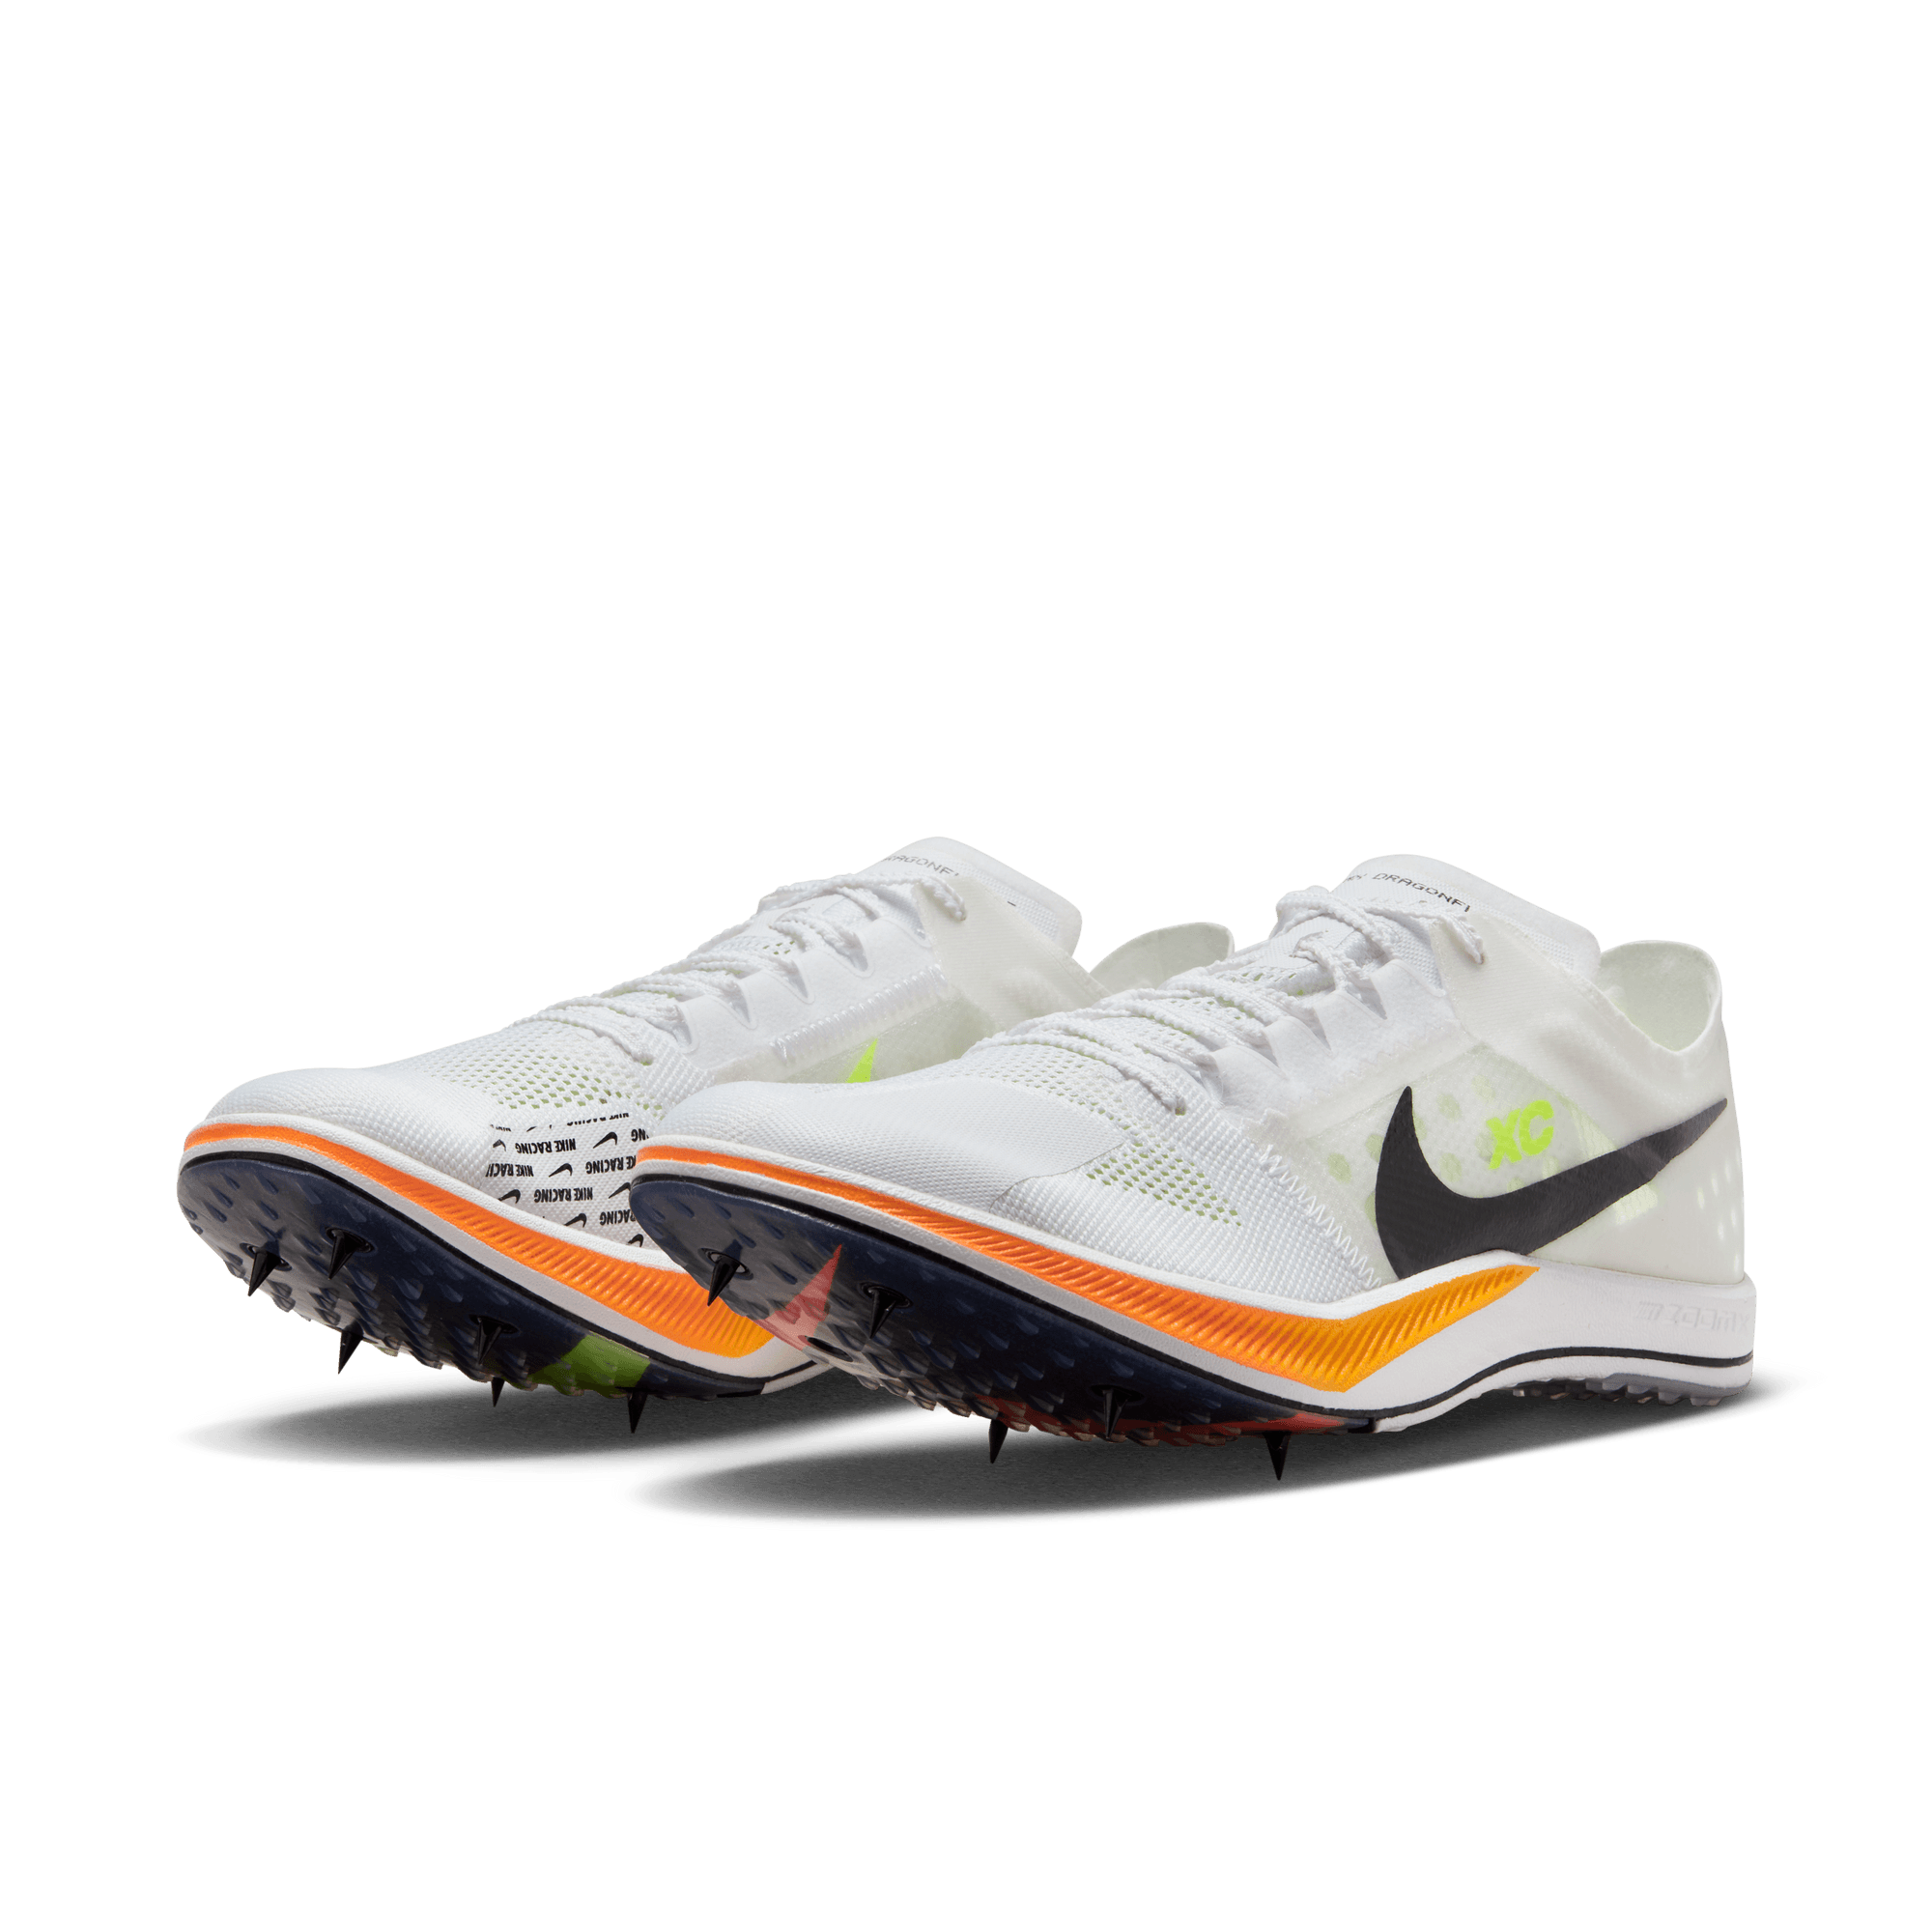 Nike Men's and Women's ZoomX Dragonfly XC Cross Country Spike